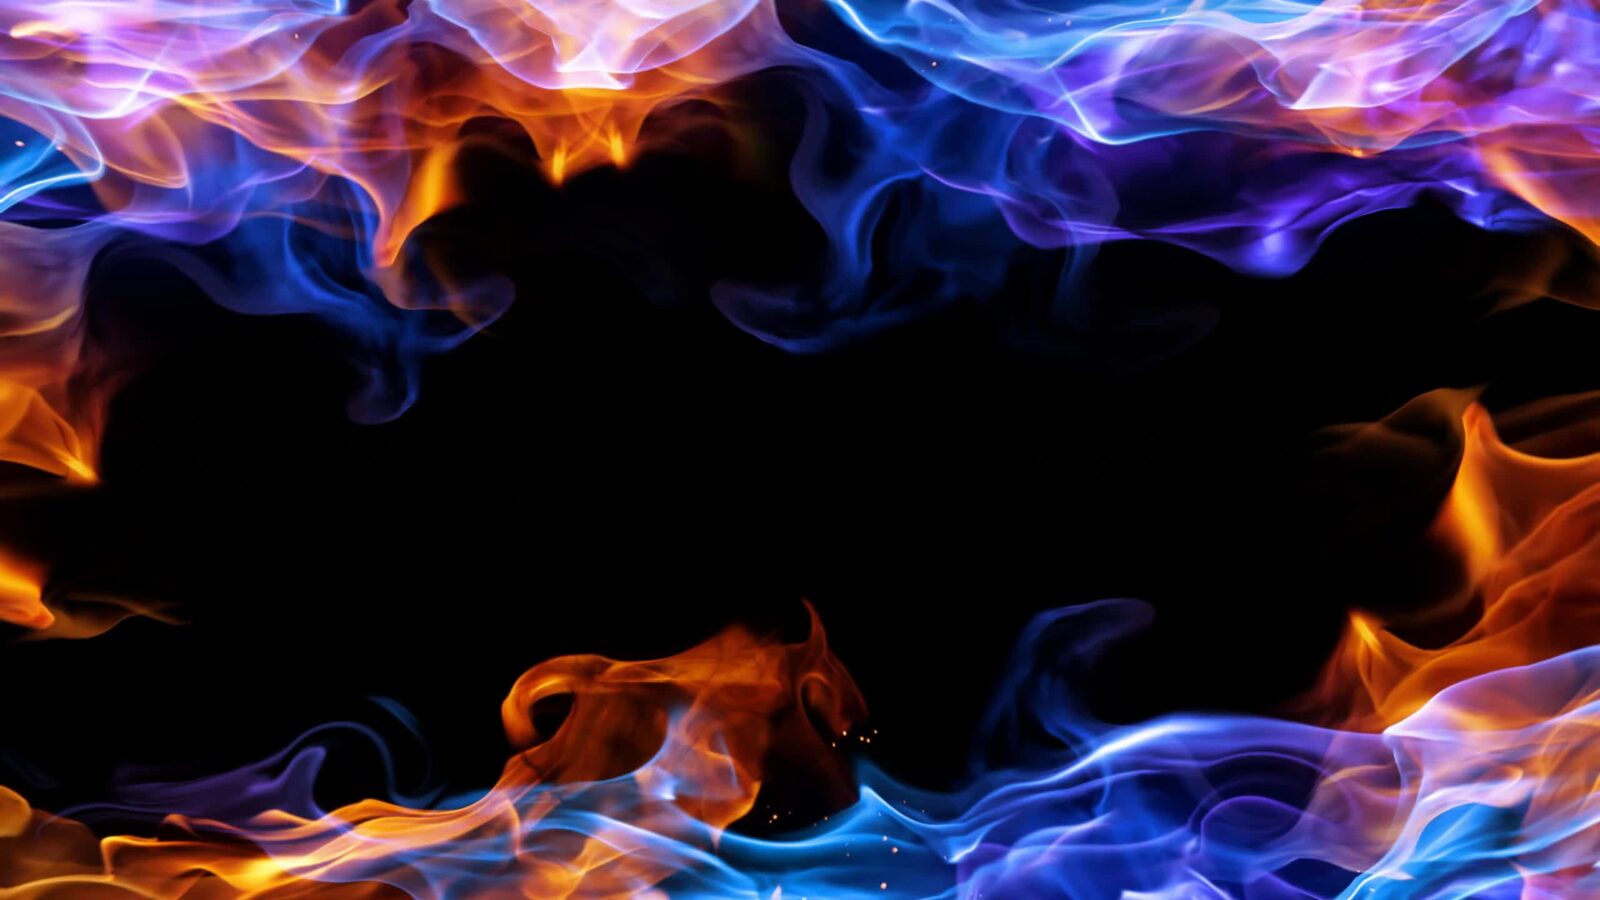 LiveWallpapers4Free.com | Red Blue Flame Abstract 2K Quality - Free Live Wallpaper